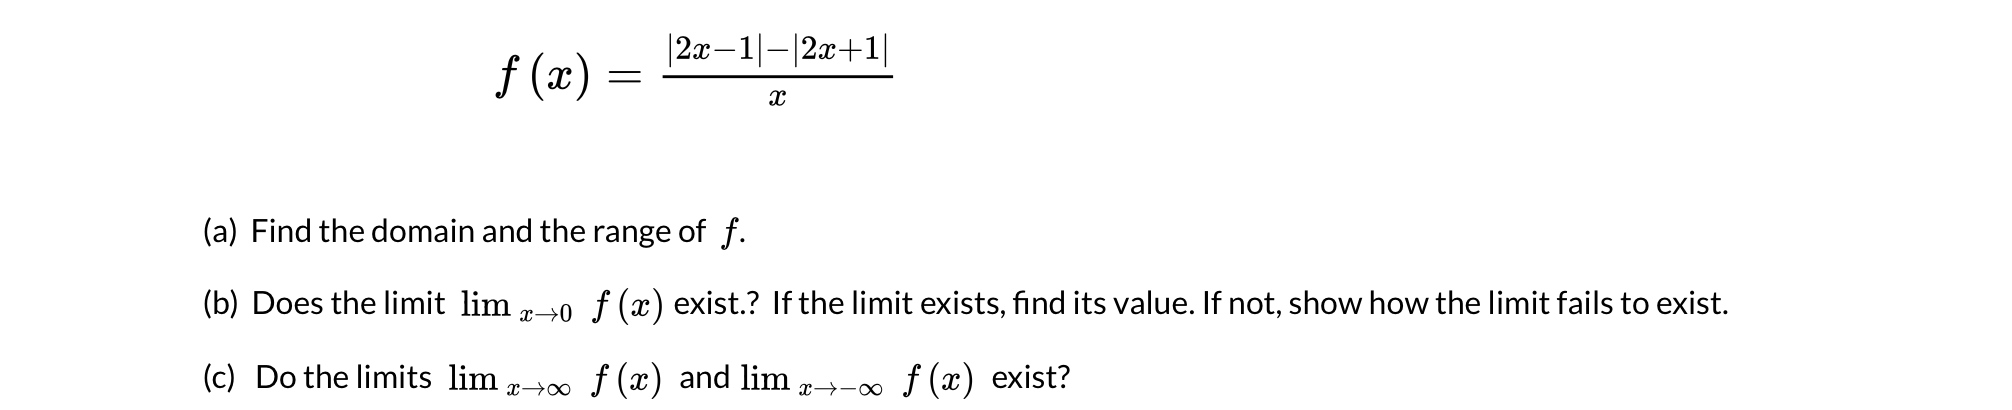 |2x–1|-|2x+1|
f (x) =
(a) Find the domain and the range of f.
(b) Does the limit lim -0 f (x) exist.? If the limit exists, find its value. If not, show how the limit fails to exist.
(c) Do the limits lim
f (x) and lim
f (x) exist?
